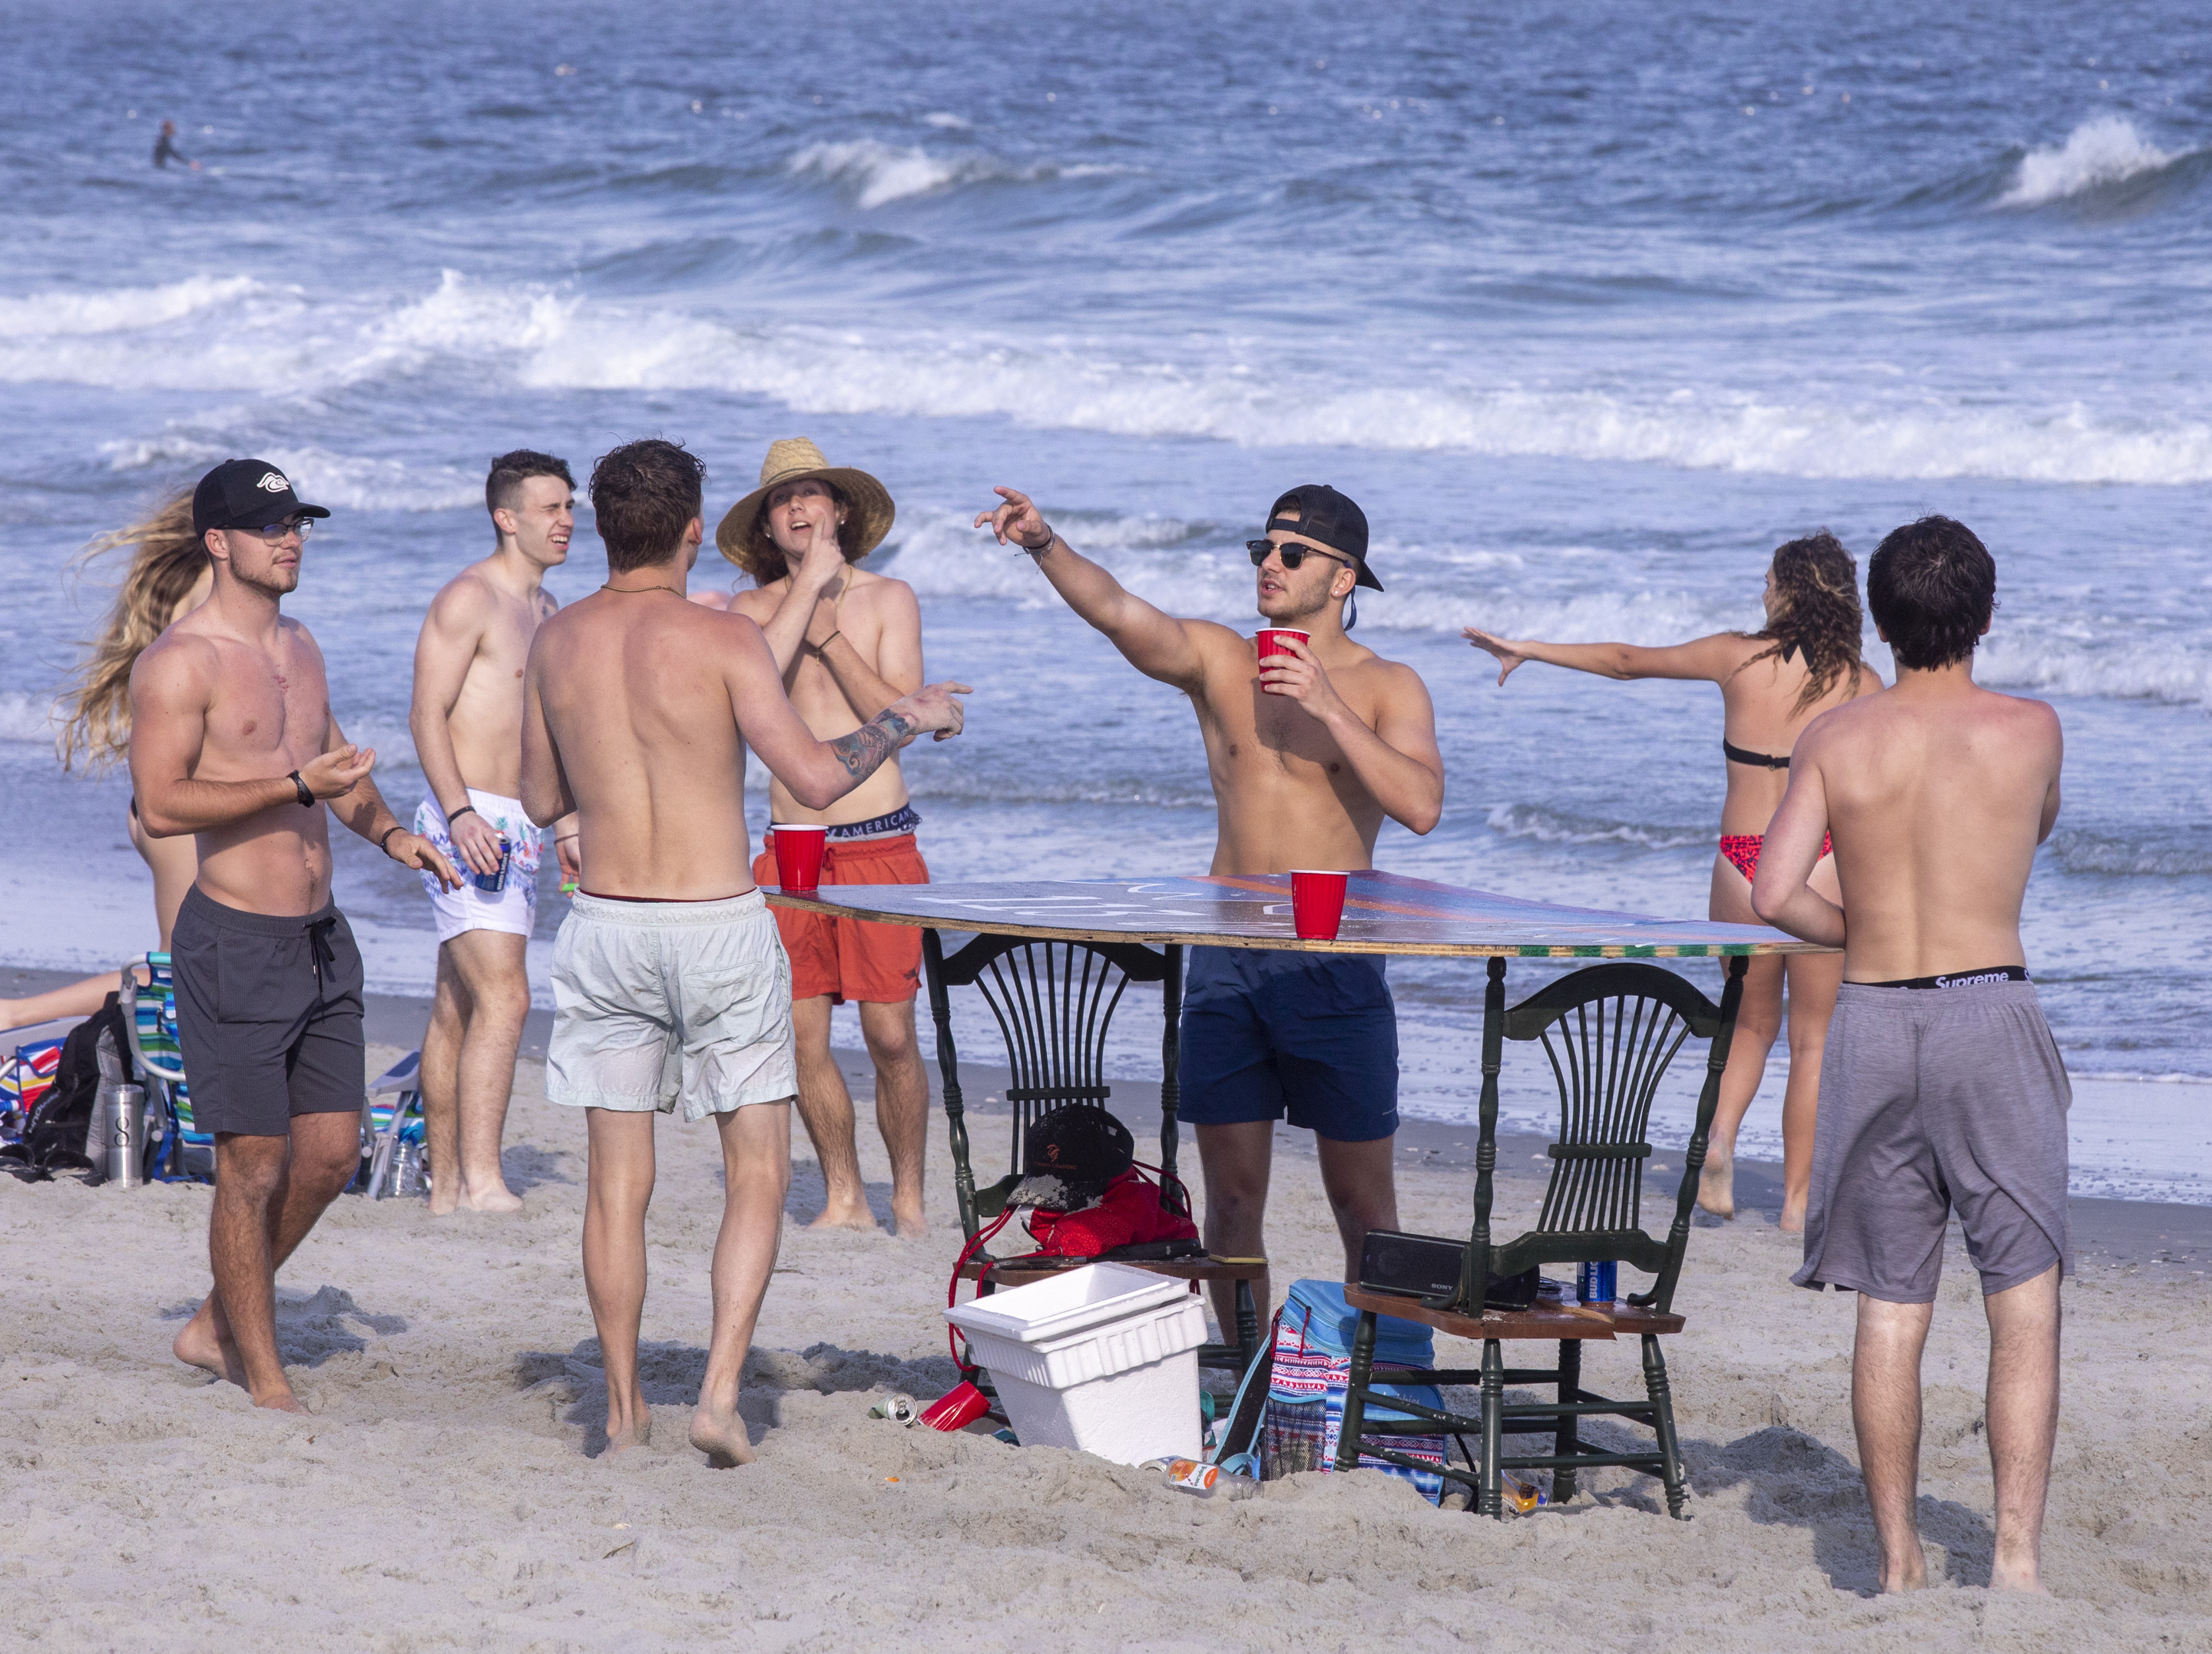 Despite warnings from government officials take caution and self distance because of coronavirus, many college students, some from Coastal Carolina University, hang out on the beach at 65th Avenue North in Myrtle Beach, S.C. on March 19, 2020. (Jason Lee—The Sun News/AP)